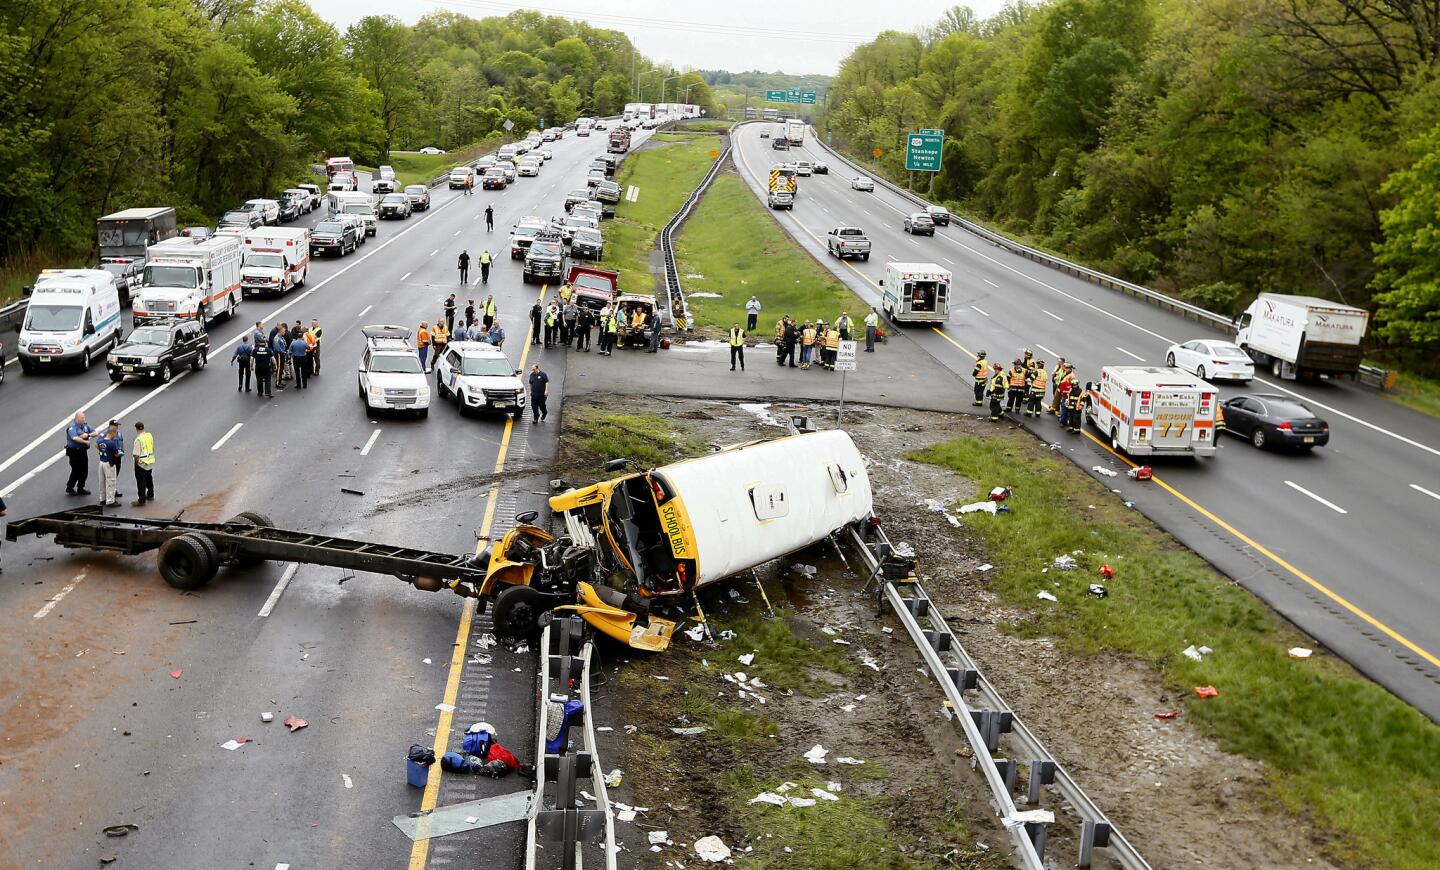 Emergency personnel examine a school bus after it collided with a dump truck, injuring multiple people, on Interstate 80 in Mount Olive, N.J., Thursday, May 17, 2018.